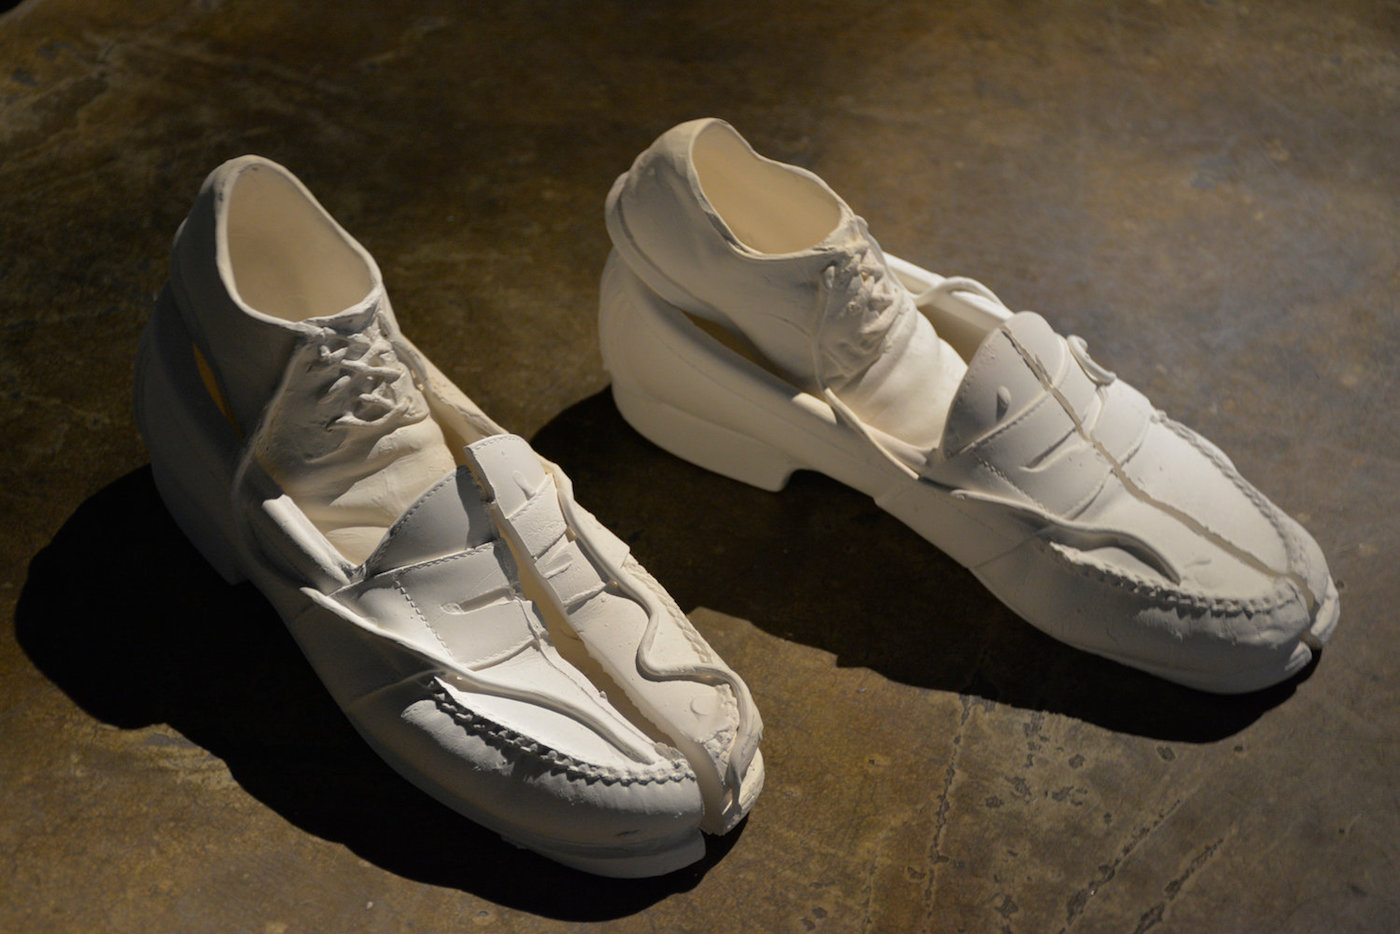 Ron Baron's Ghostly Ceramic Shoes in Beyond-Beyond